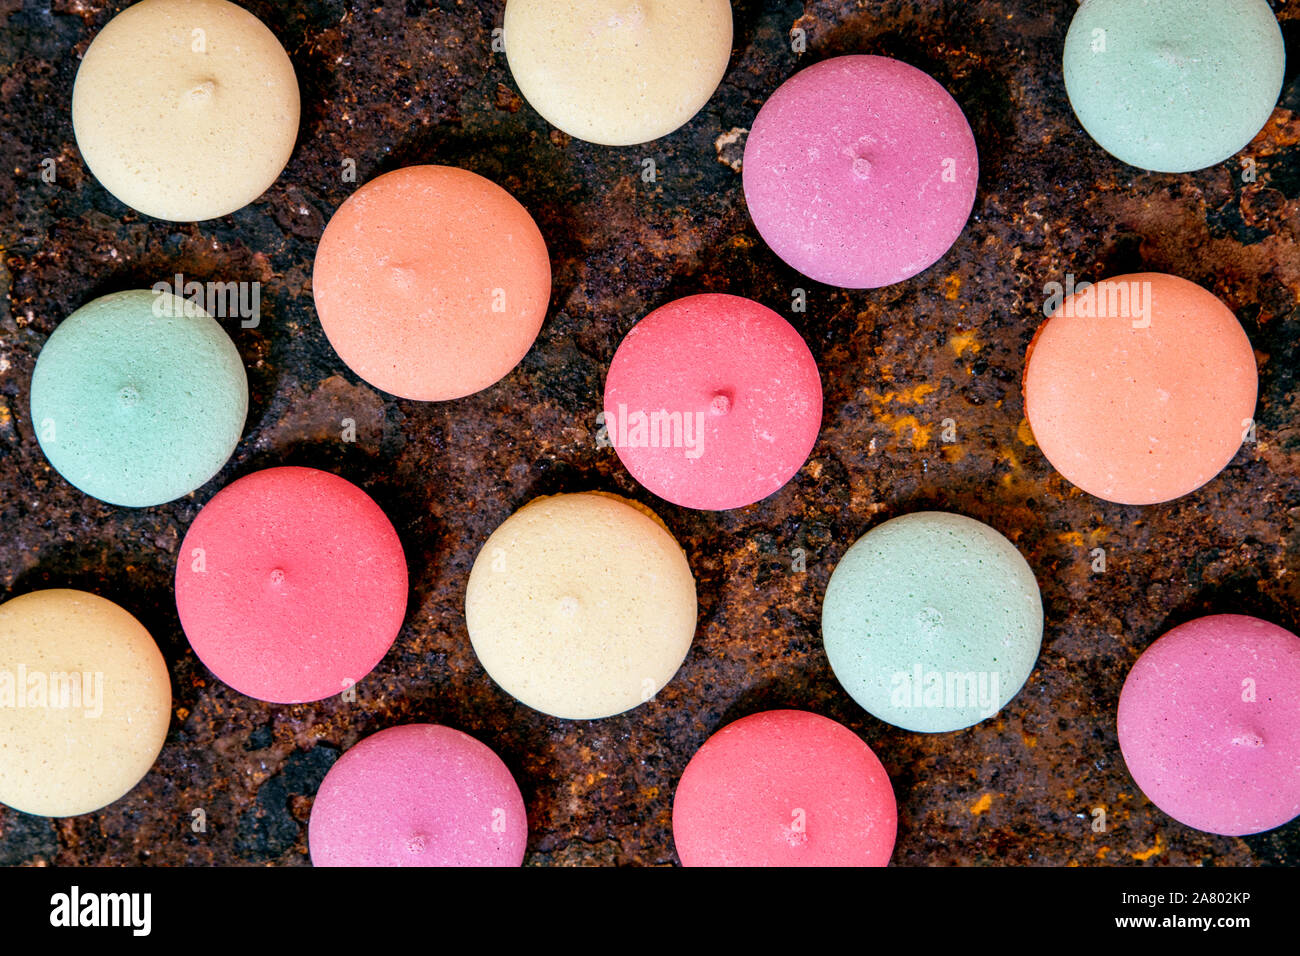 round colorful cookies or biscuits on a rusty background, topview Stock Photo